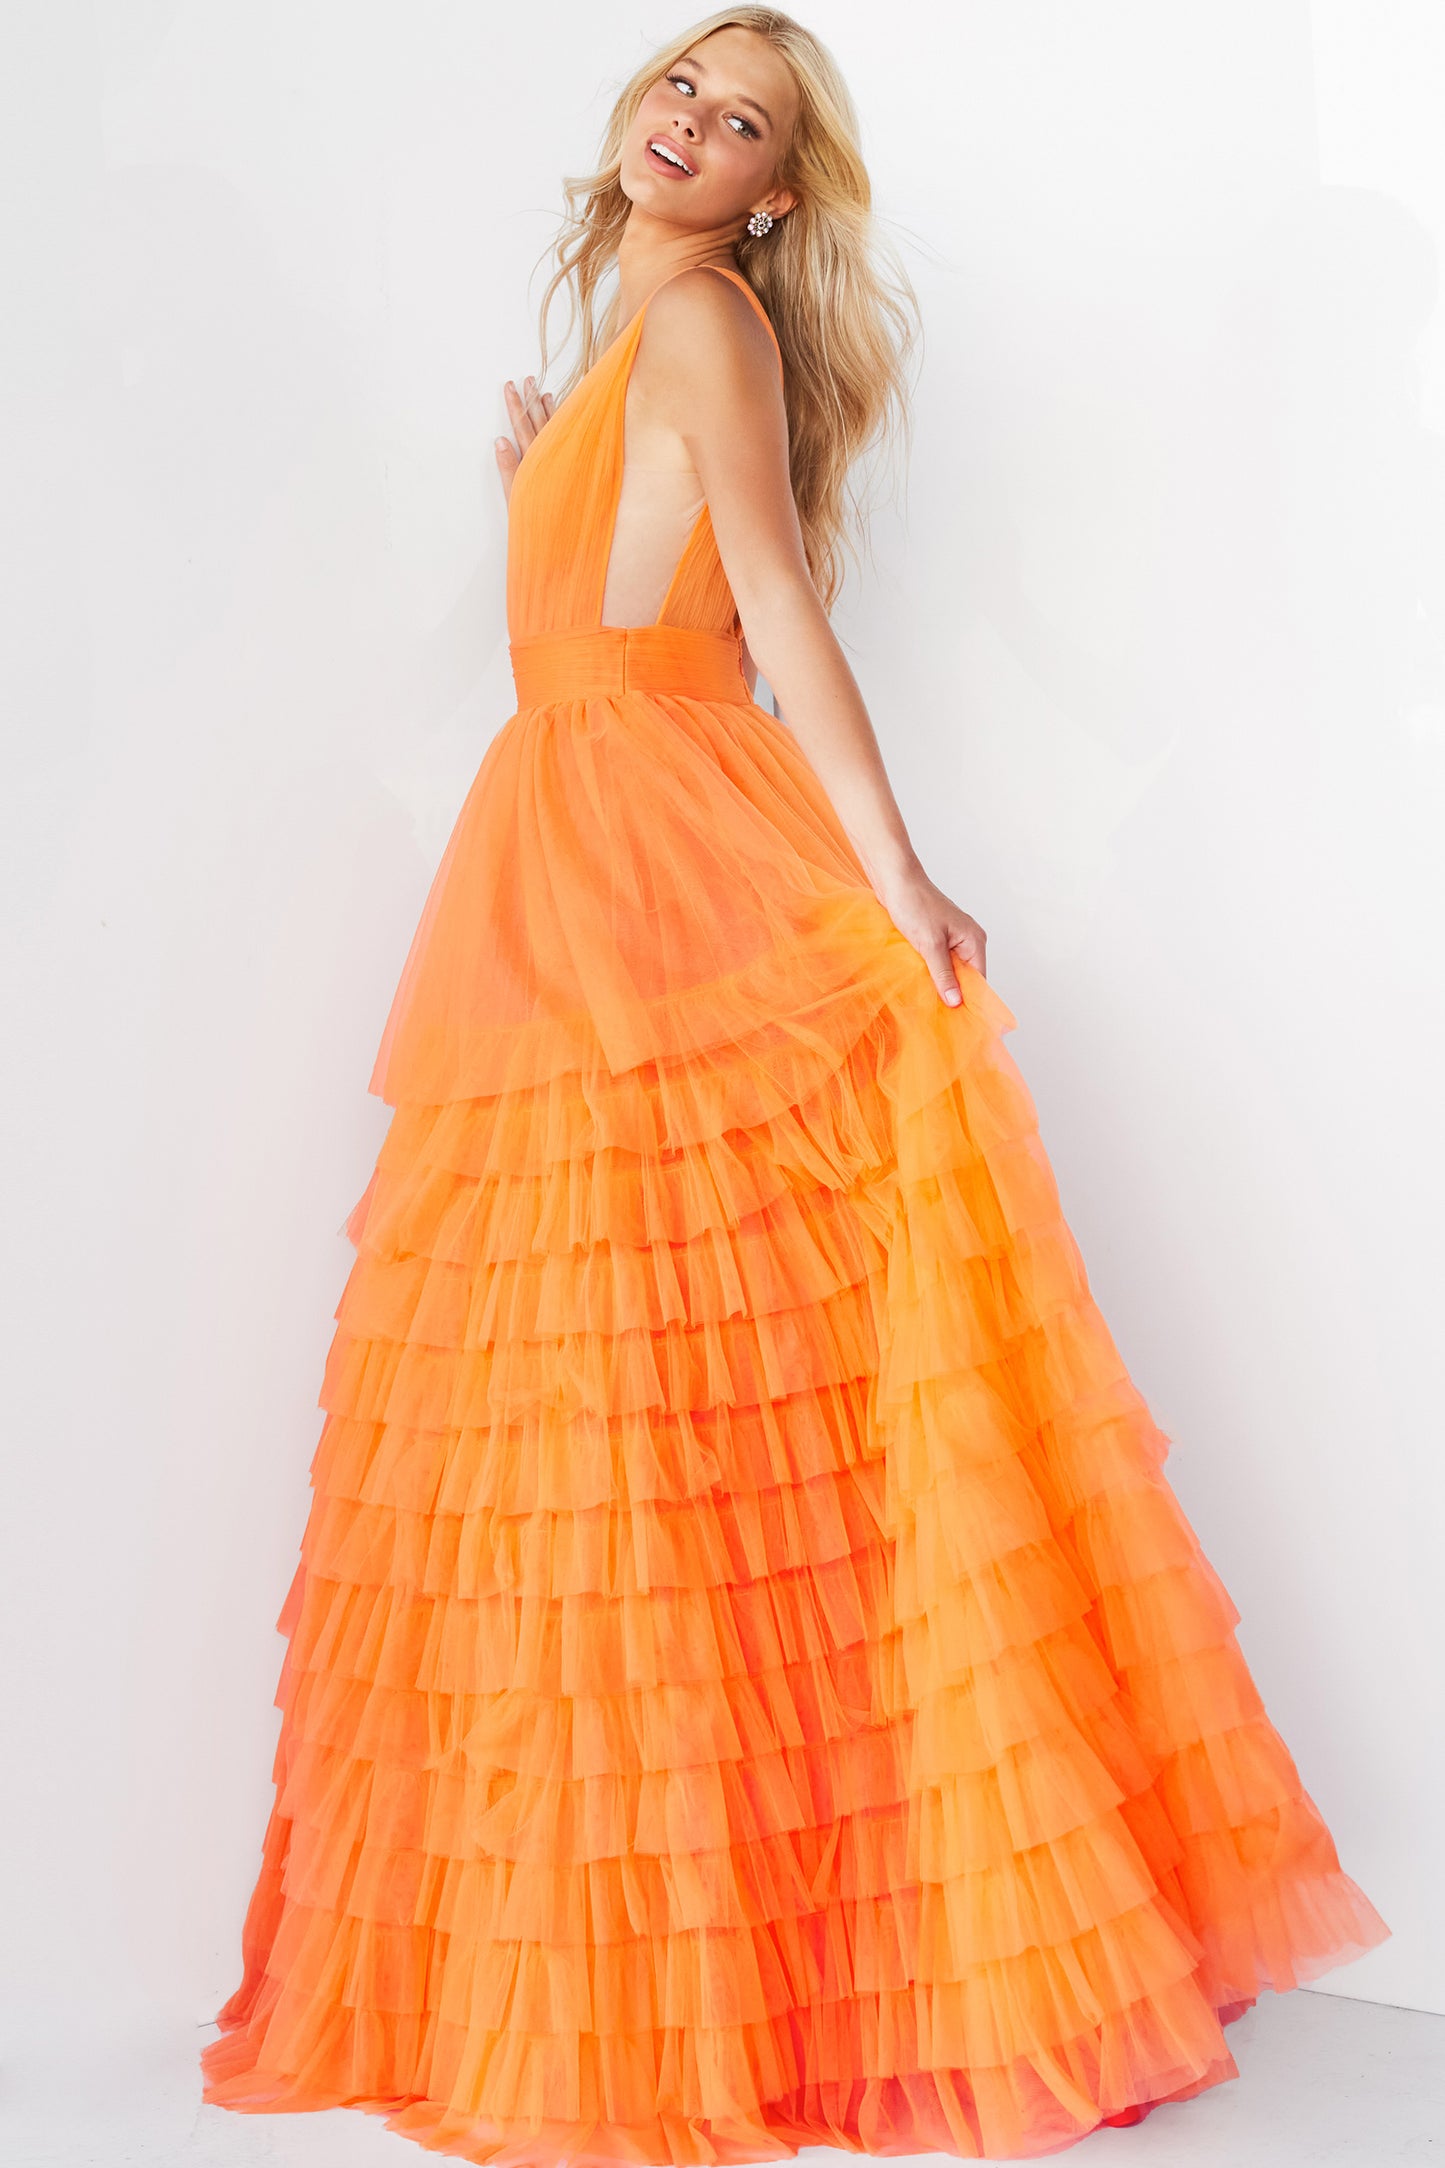 Jovani 07264 Long Ballgown Prom Pageant Gown ruffle dress v neck   Available Size-00-24  Available Color- Orange, Blush, Lilac, White